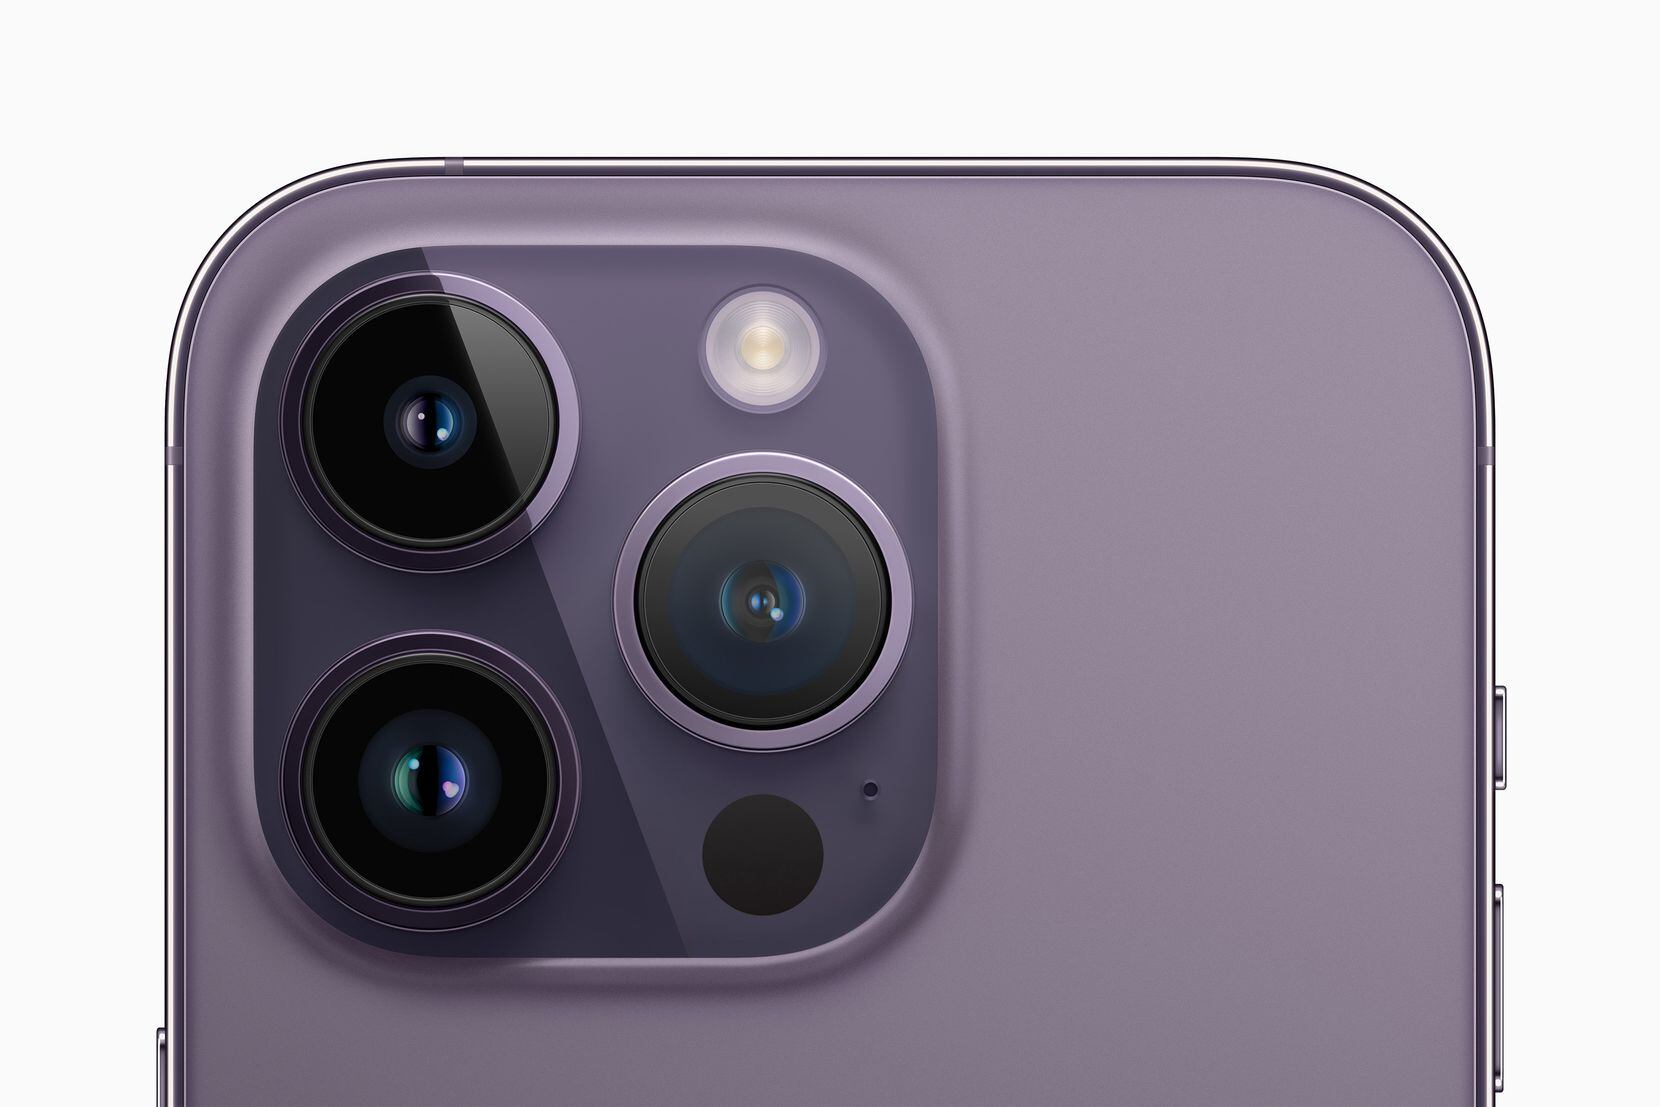 The main camera of the Apple iPhone 14 Pro has a 24-millimeter wide-angle lens with a...